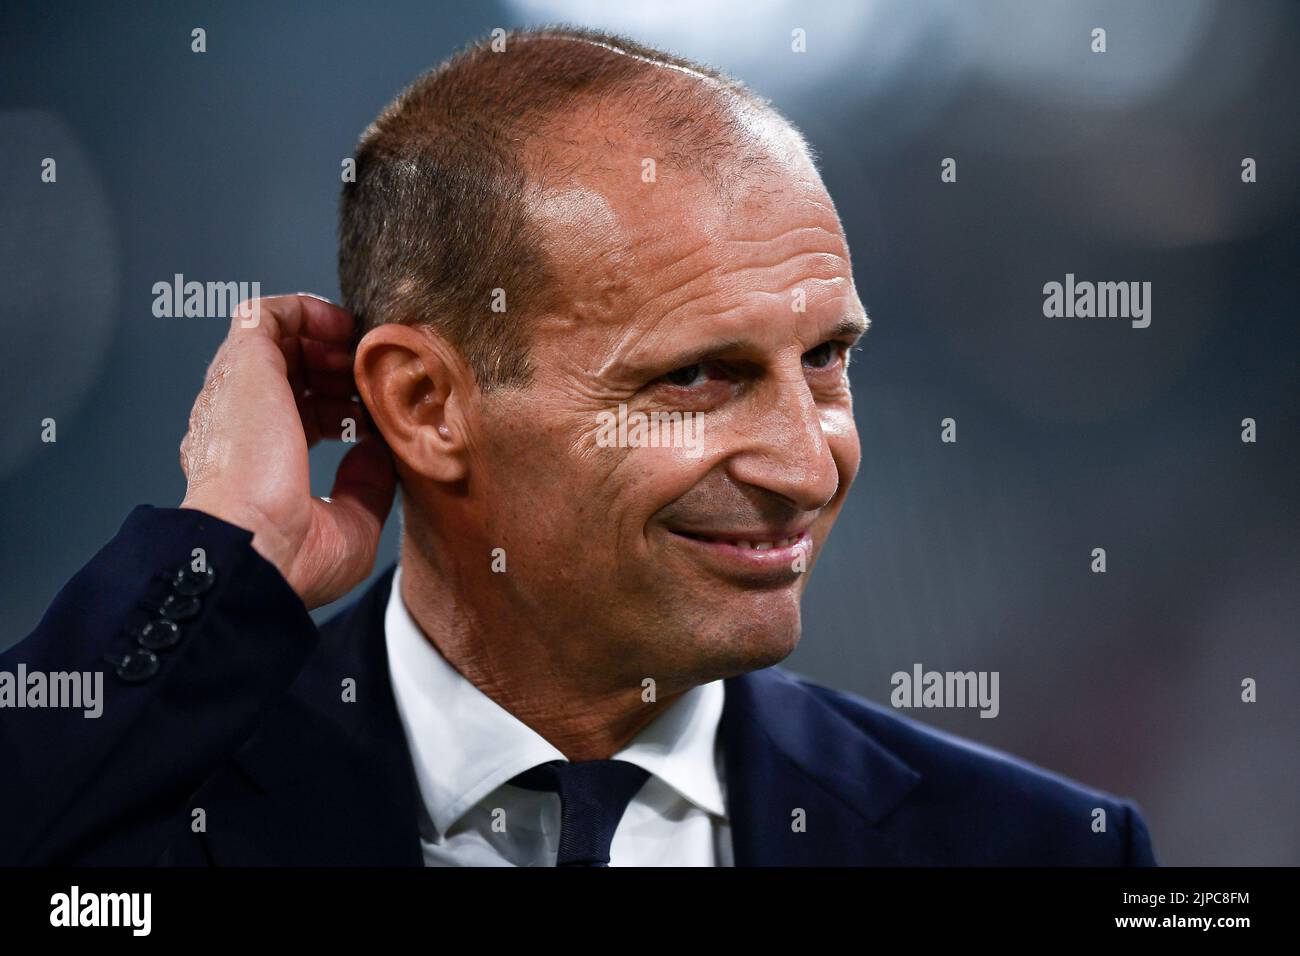 Turin, Italy. 15 August 2022. Massimiliano Allegri, head coach of Juventus FC, looks on prior to the Serie A football match between Juventus FC and US Sassuolo. Credit: Nicolò Campo/Alamy Live News Stock Photo